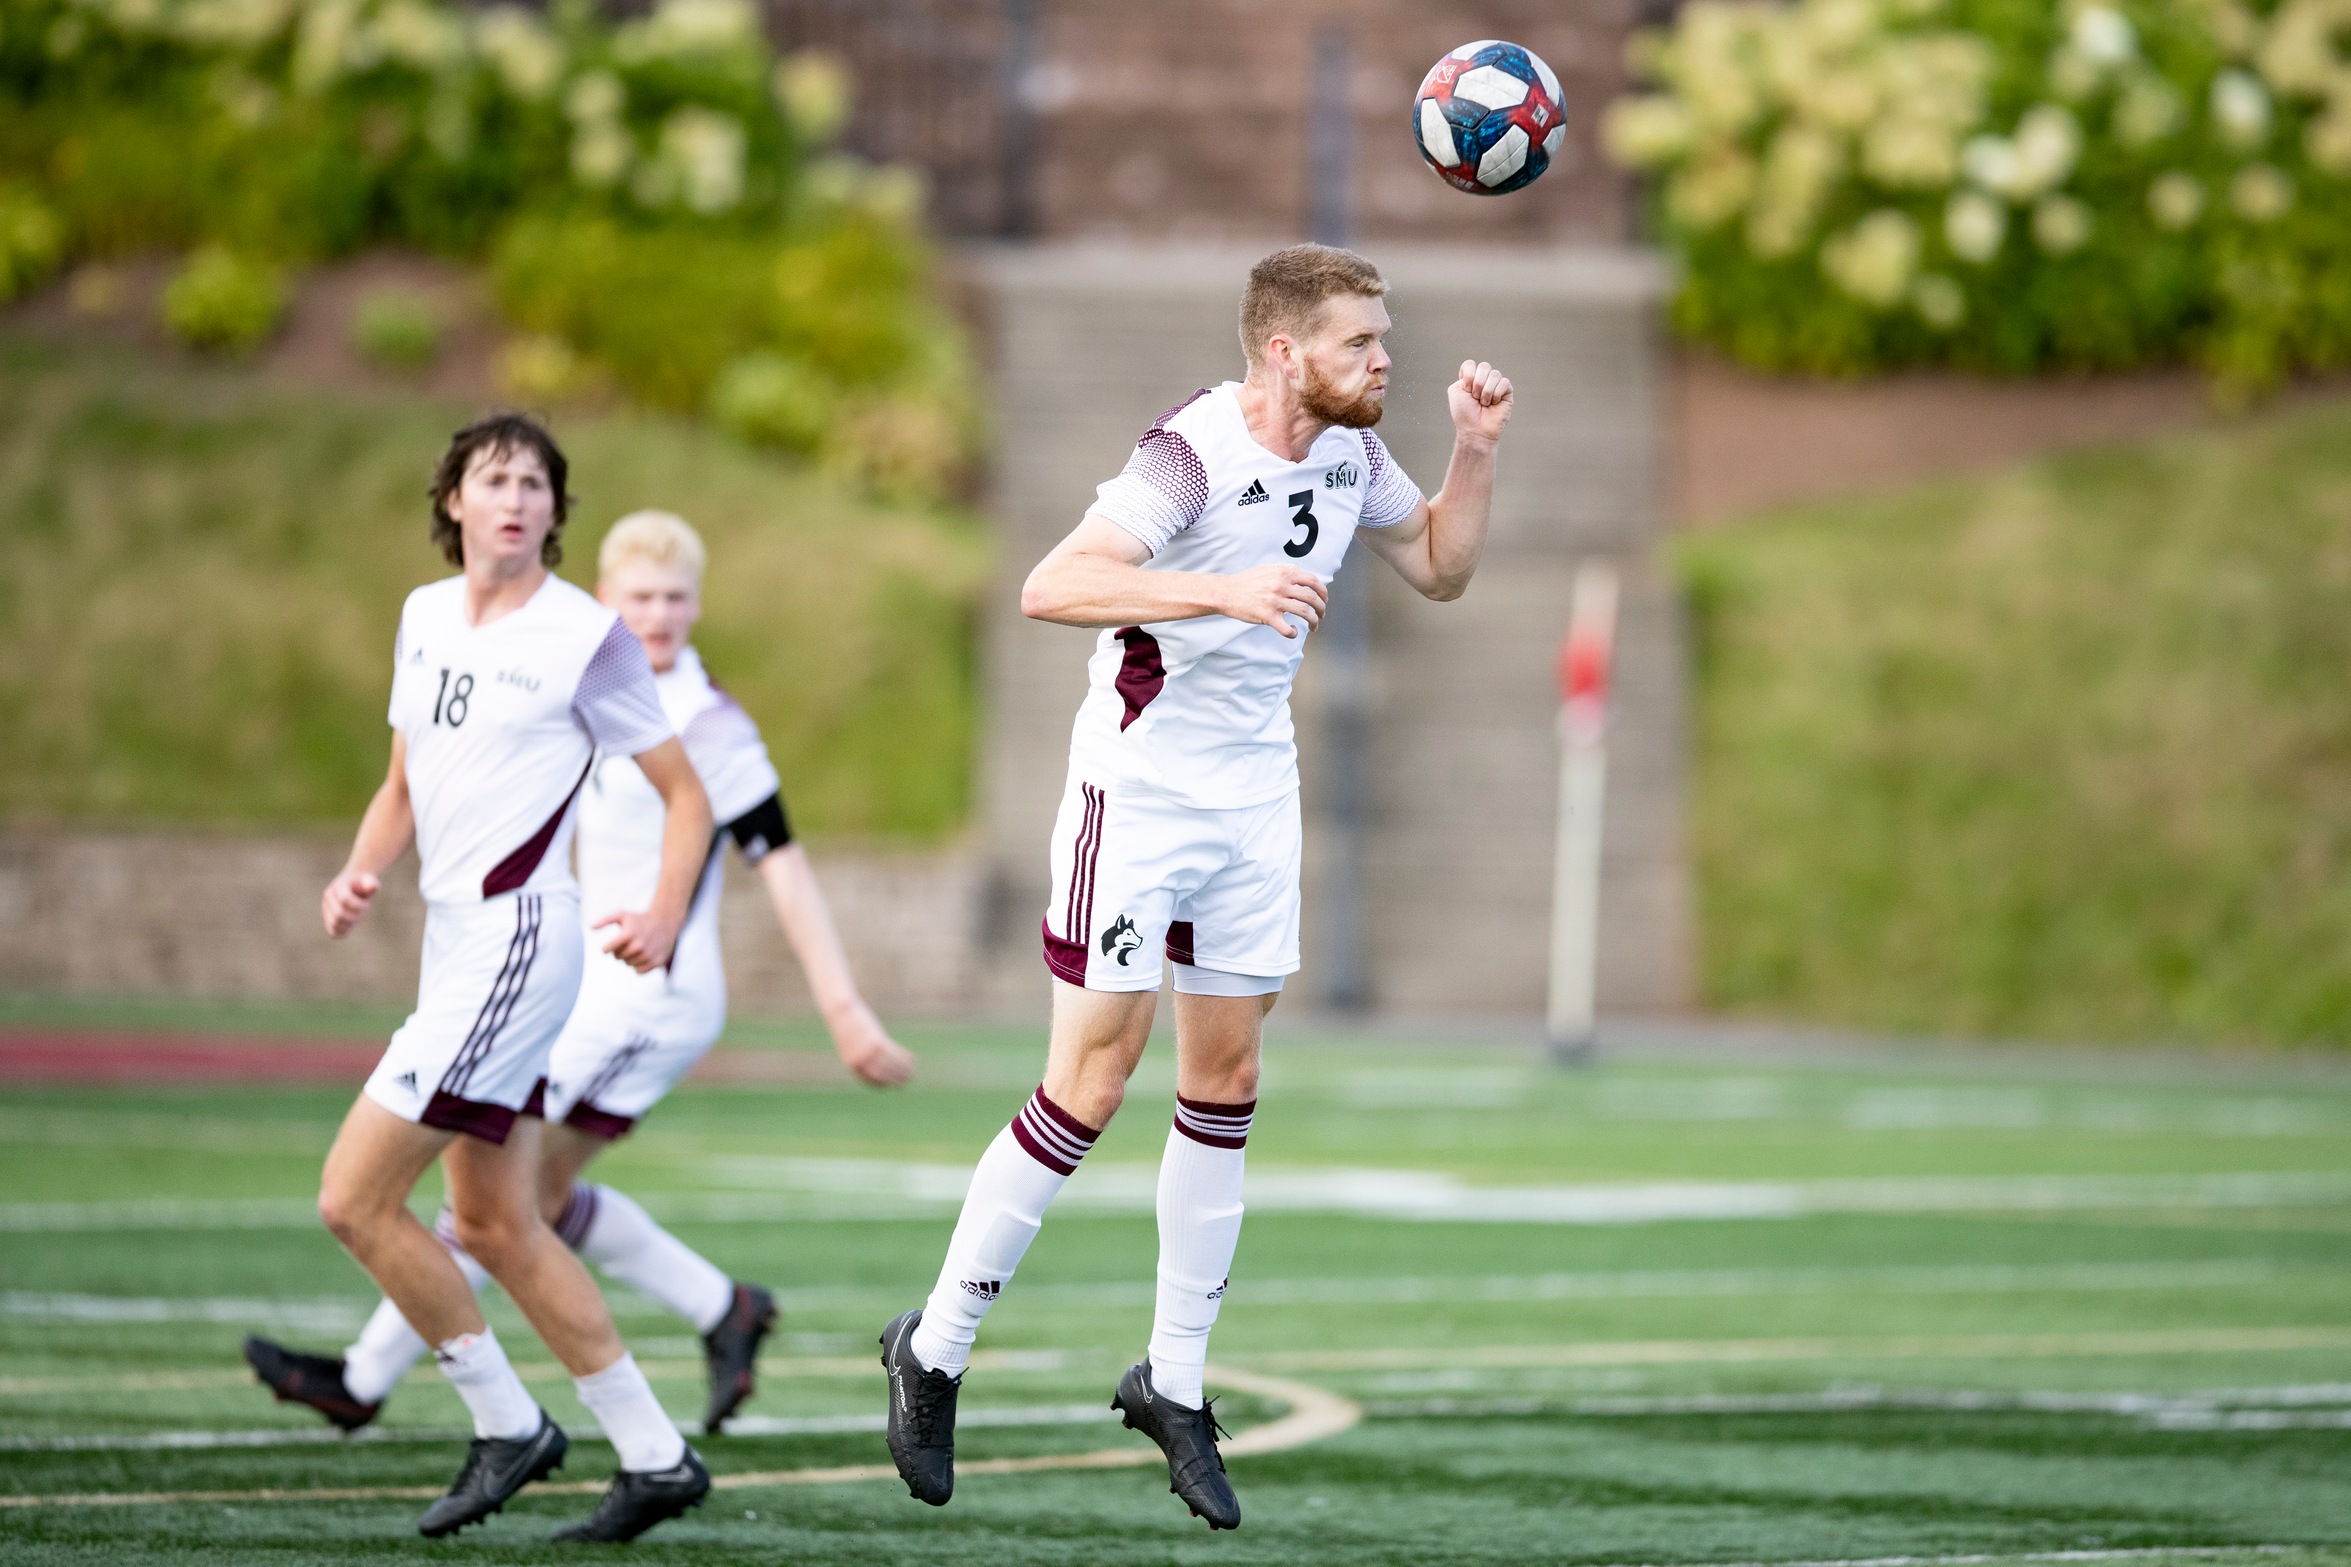 Huskies defender Adam Dunsworth (#3) heads the ball during Saint Mary's 4-0 win over the Mount Allison Mounties on Sept. 18, 2022 (Photos courtesy: Paul Lynch / Mounties Athletics)